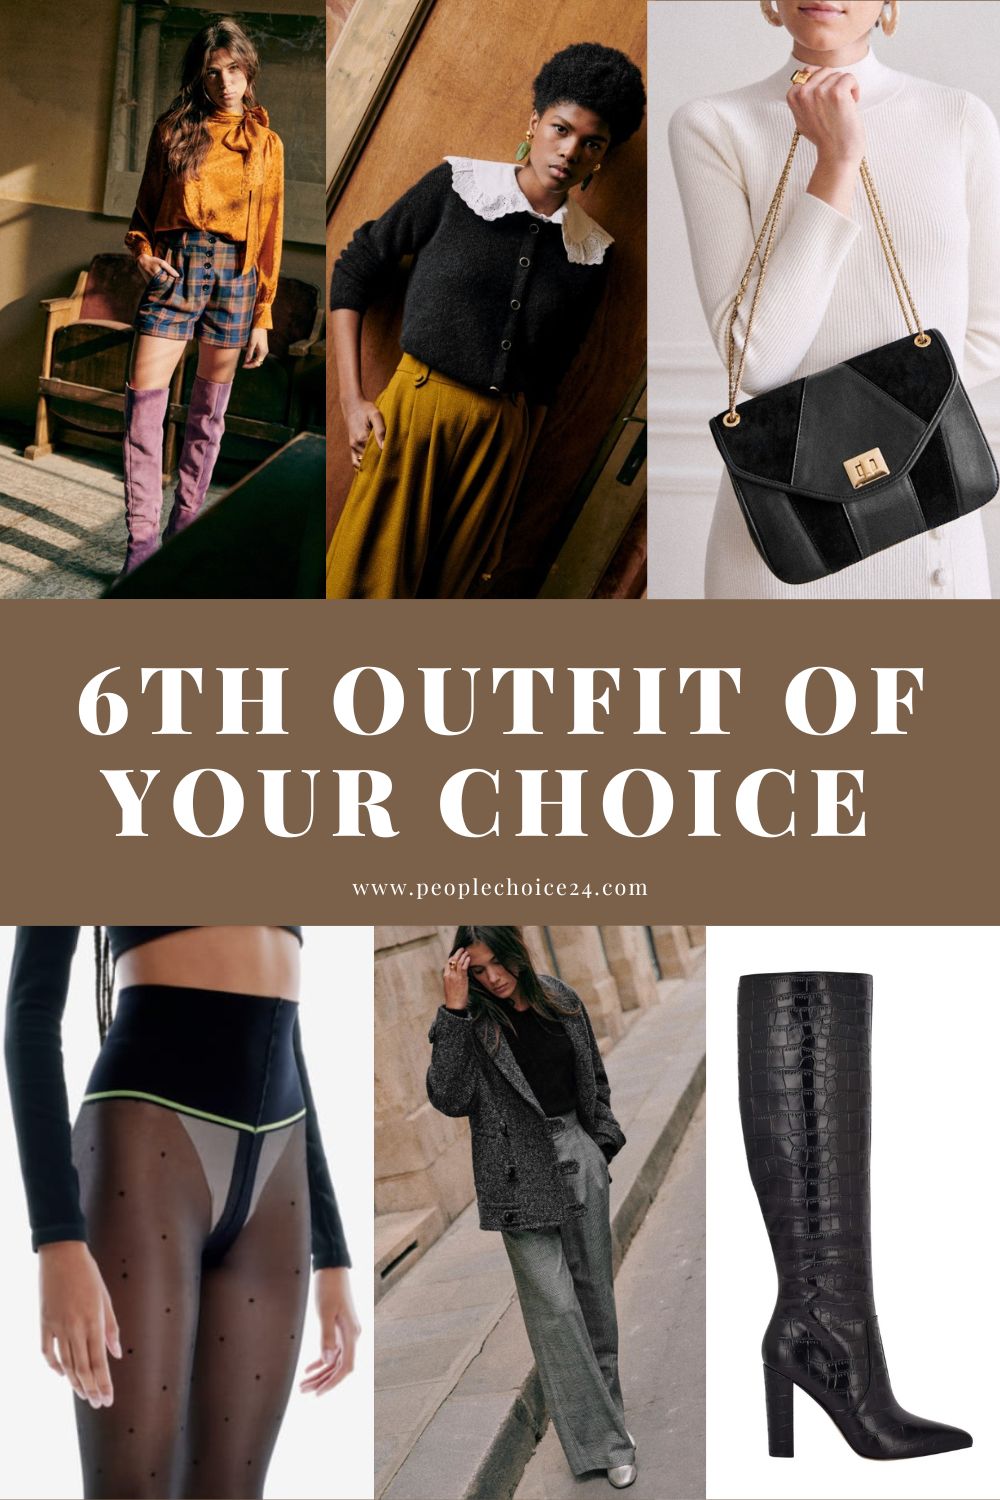 6th Outfit Of Your Choice